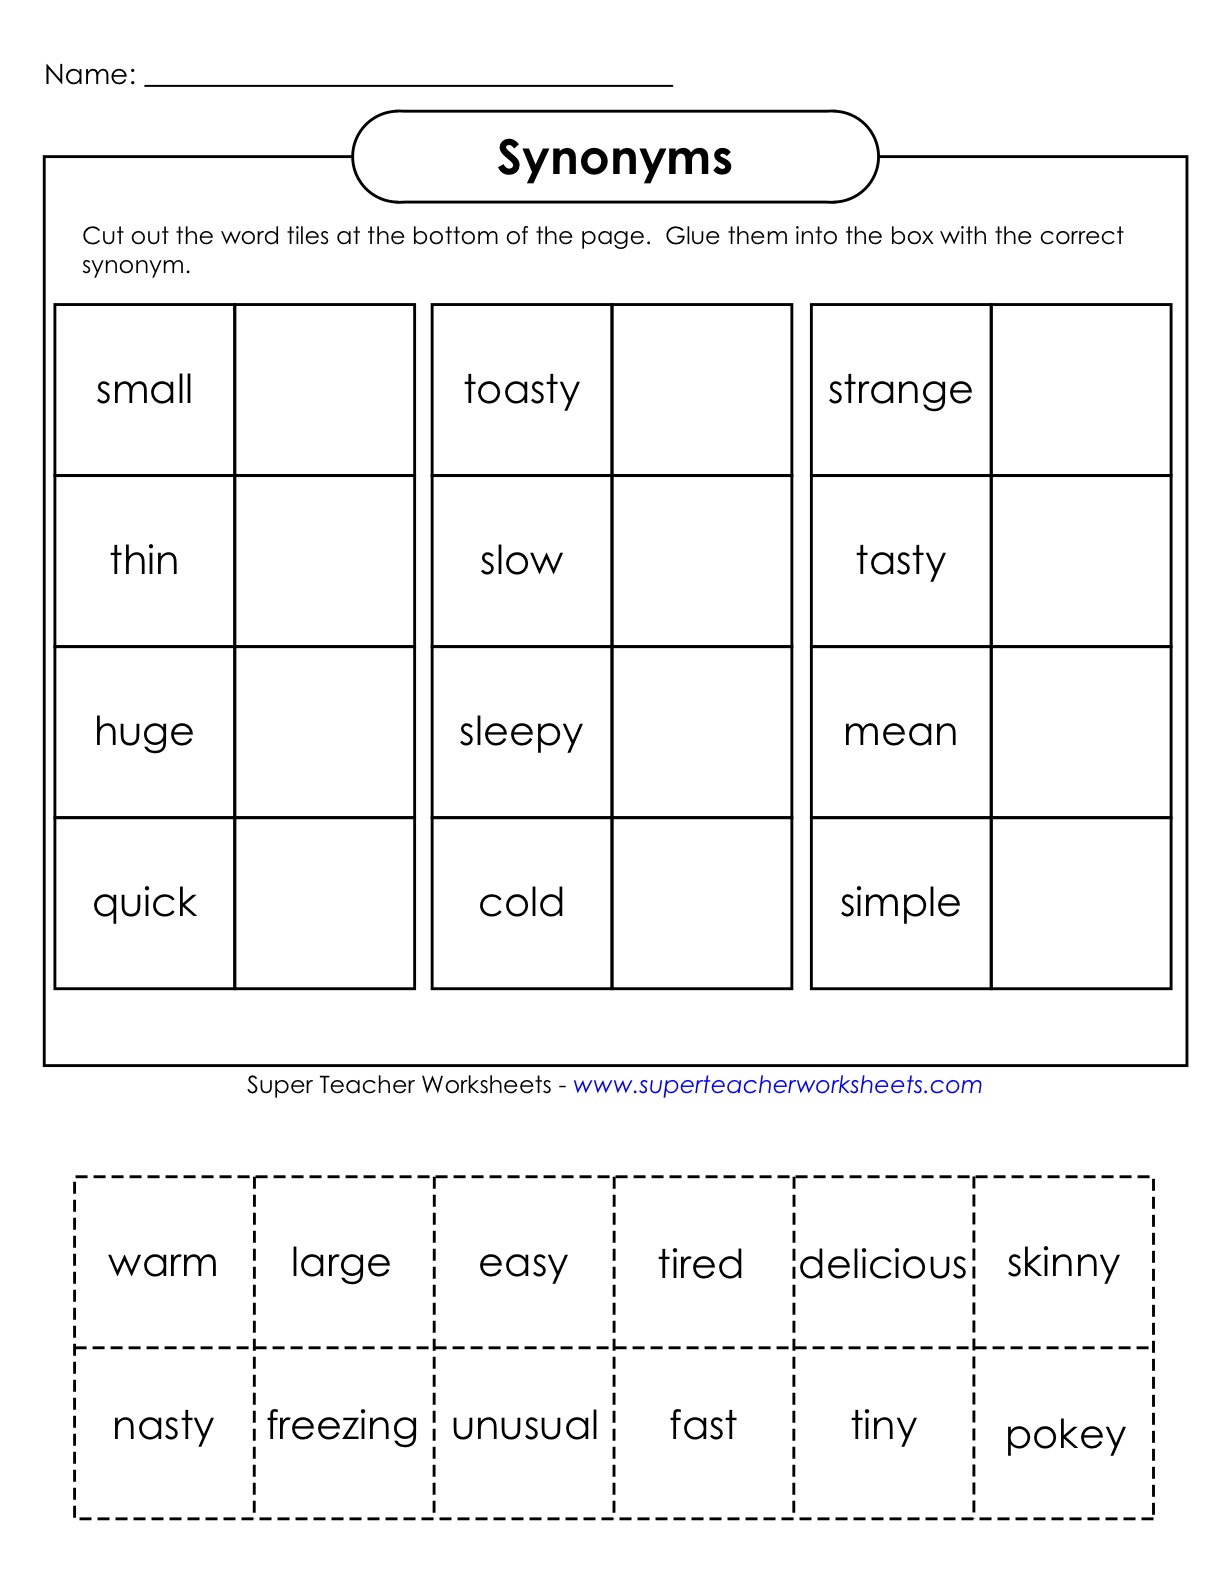 grade-3-grammar-topic-27-synonyms-worksheets-lets-share-knowledge